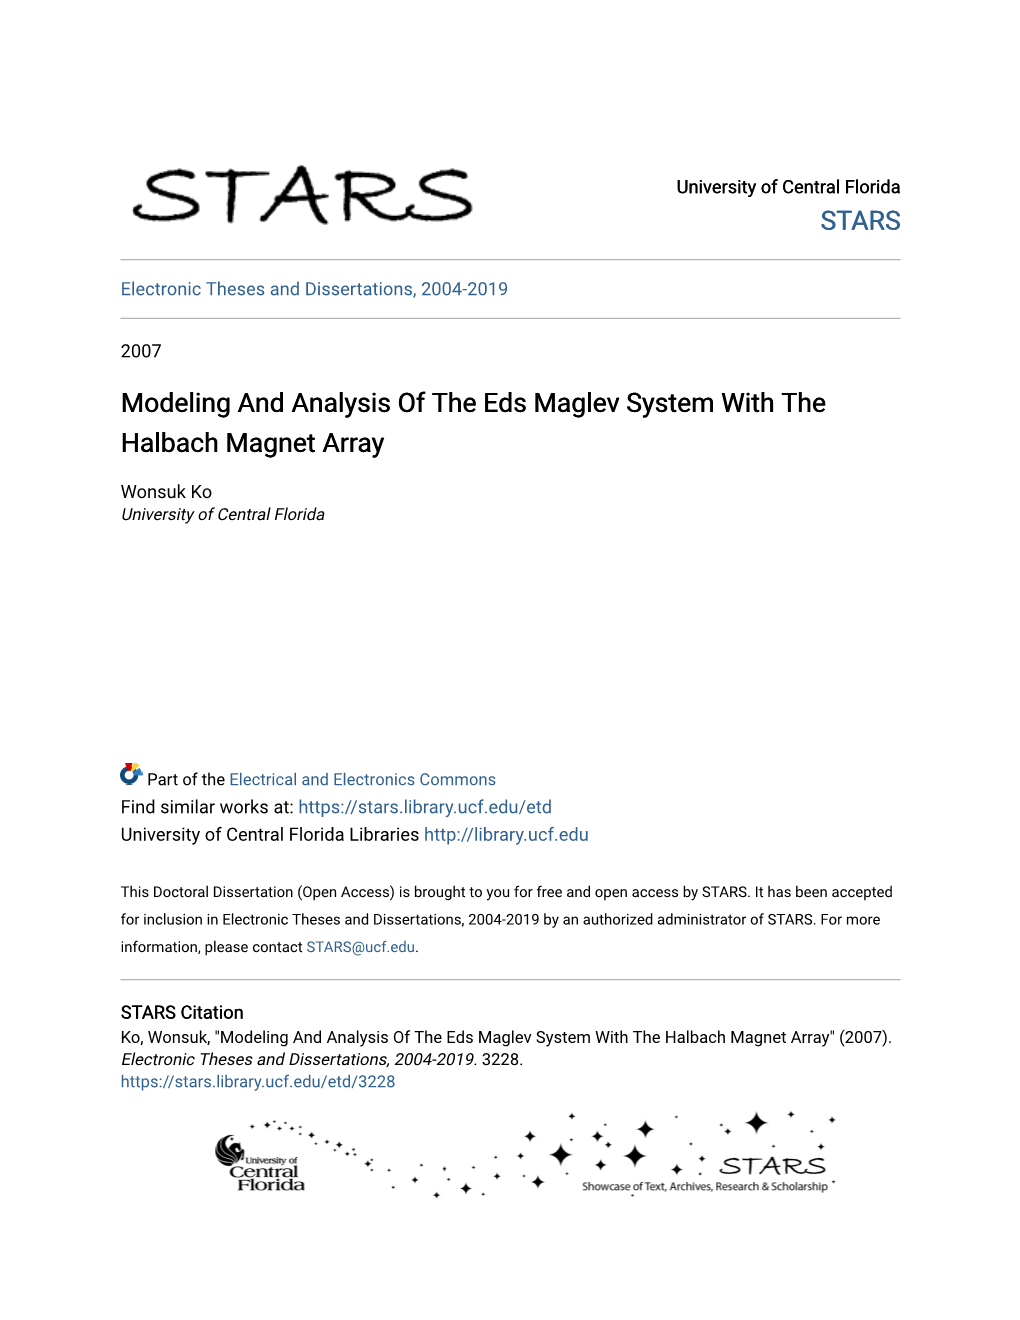 Modeling and Analysis of the Eds Maglev System with the Halbach Magnet Array